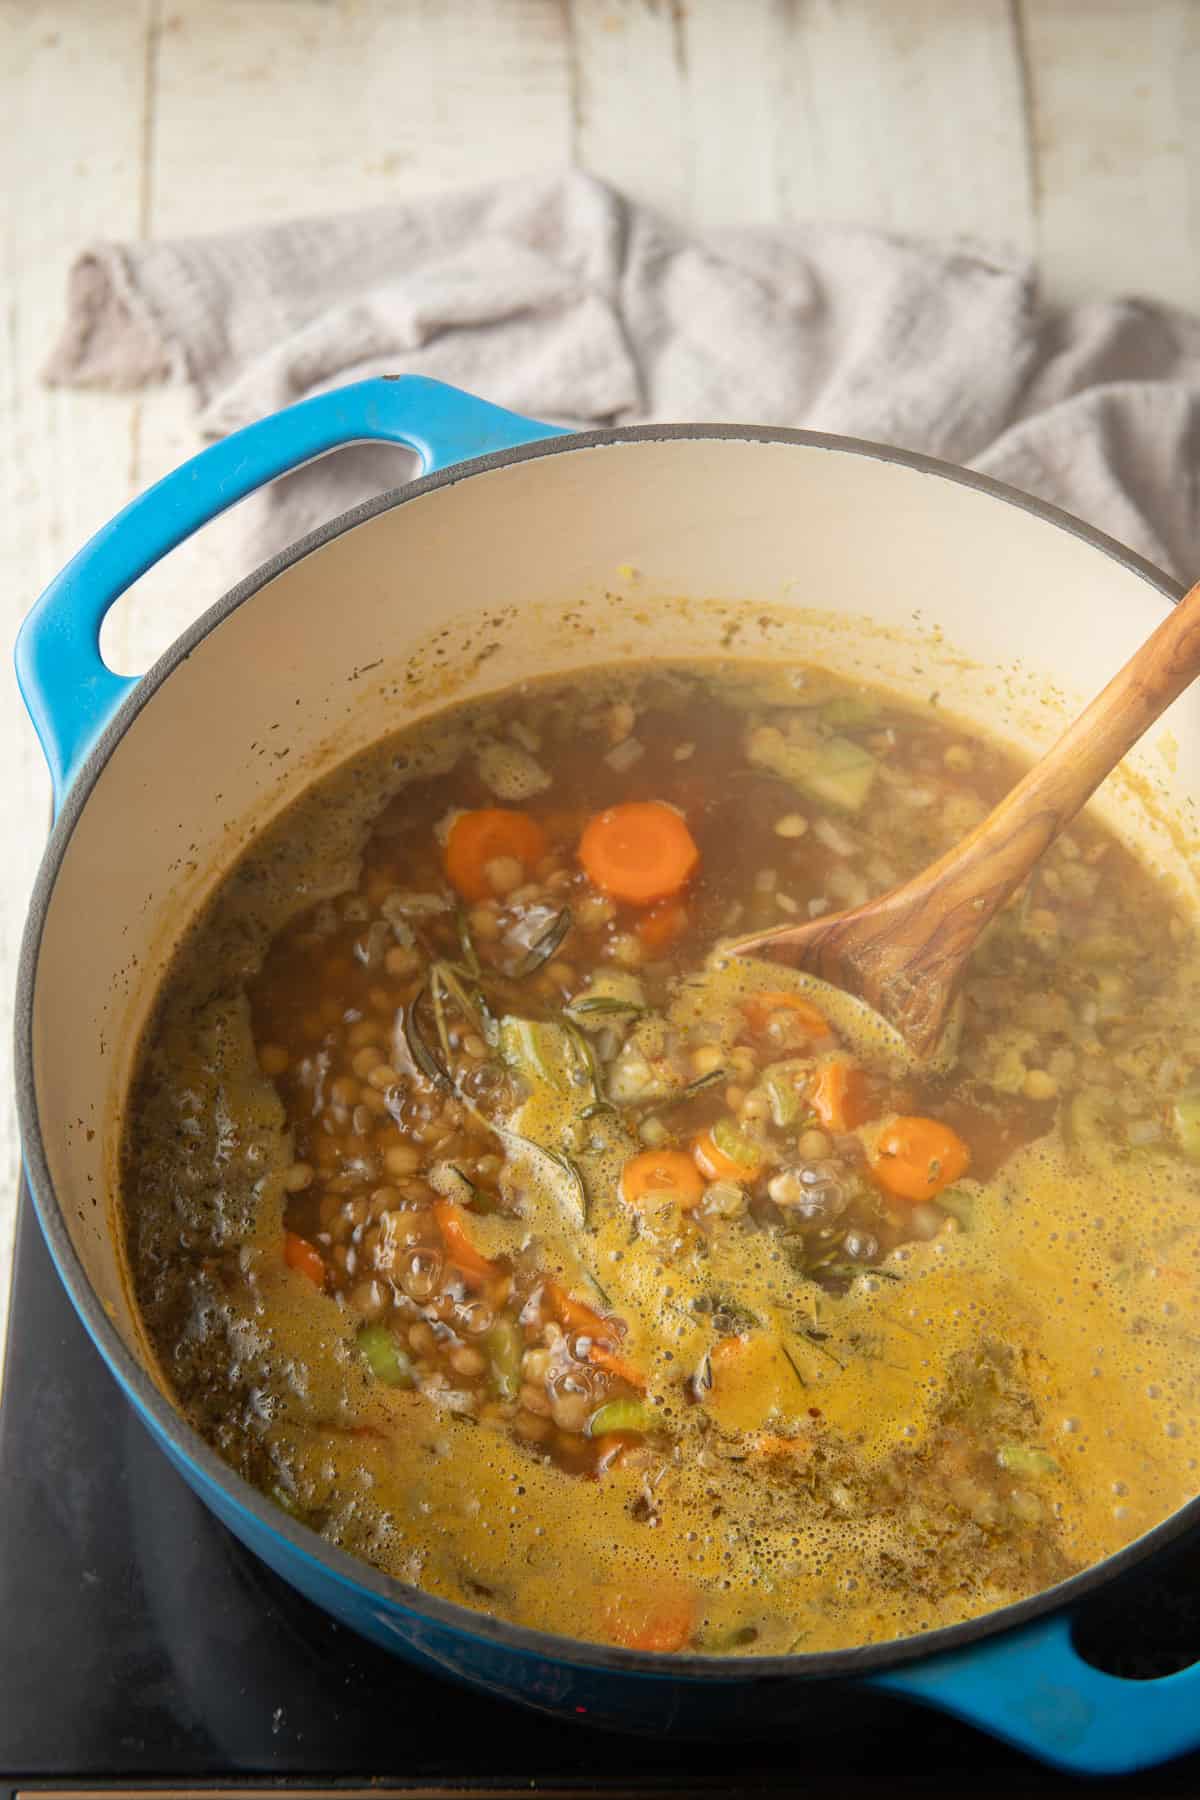 Lentil soup simmering with a wooden spoon.